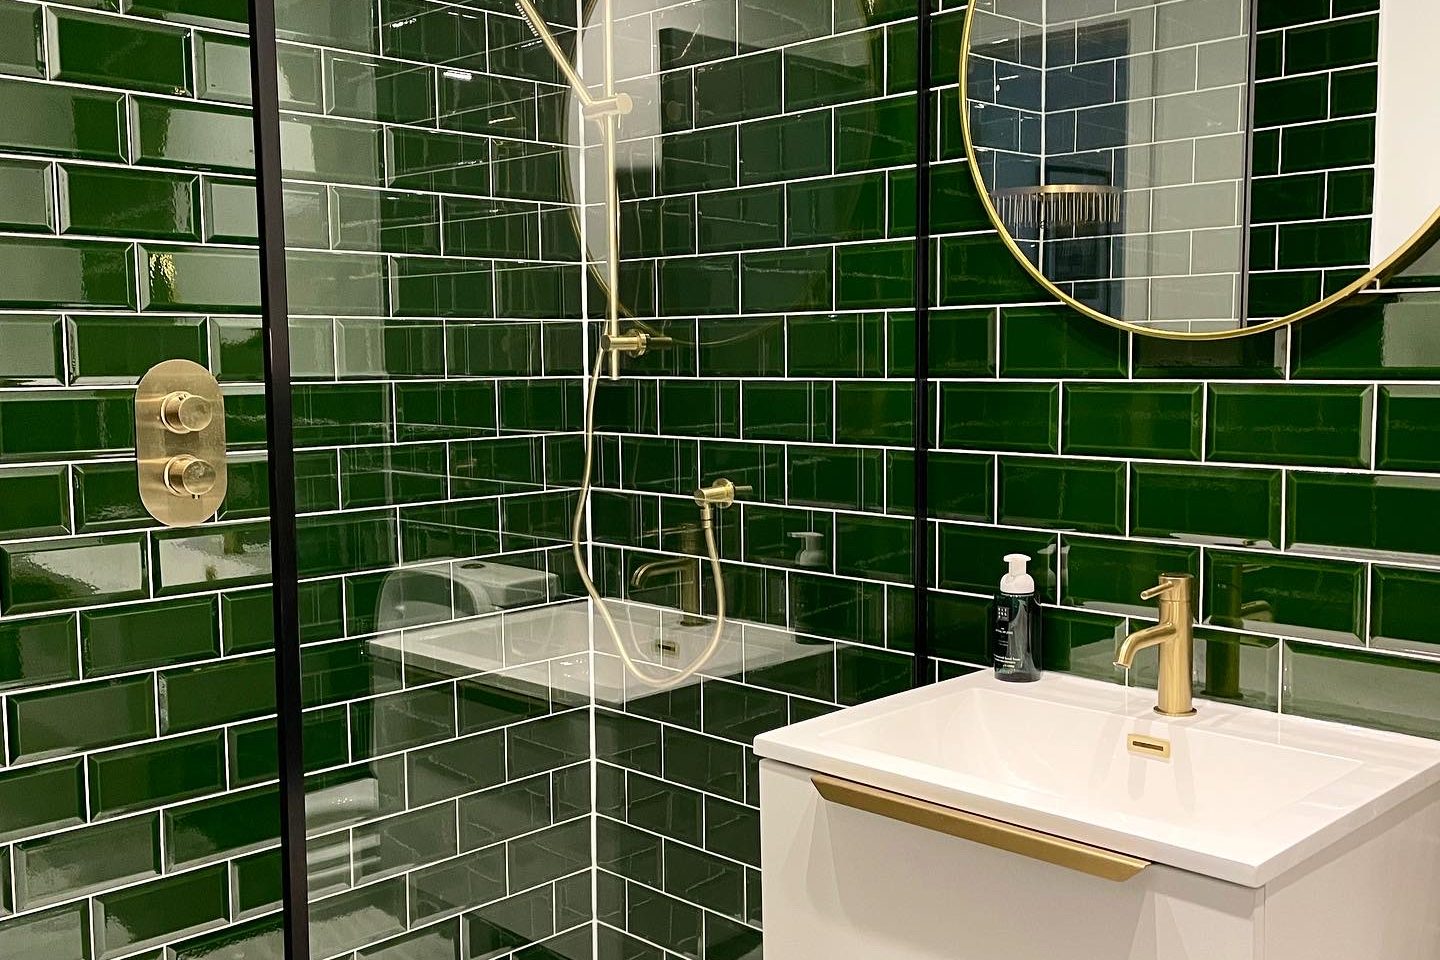 New Bathroom, racing green tiles, new shower with gold fittings and a round mirror above an enclosed fitted sink.